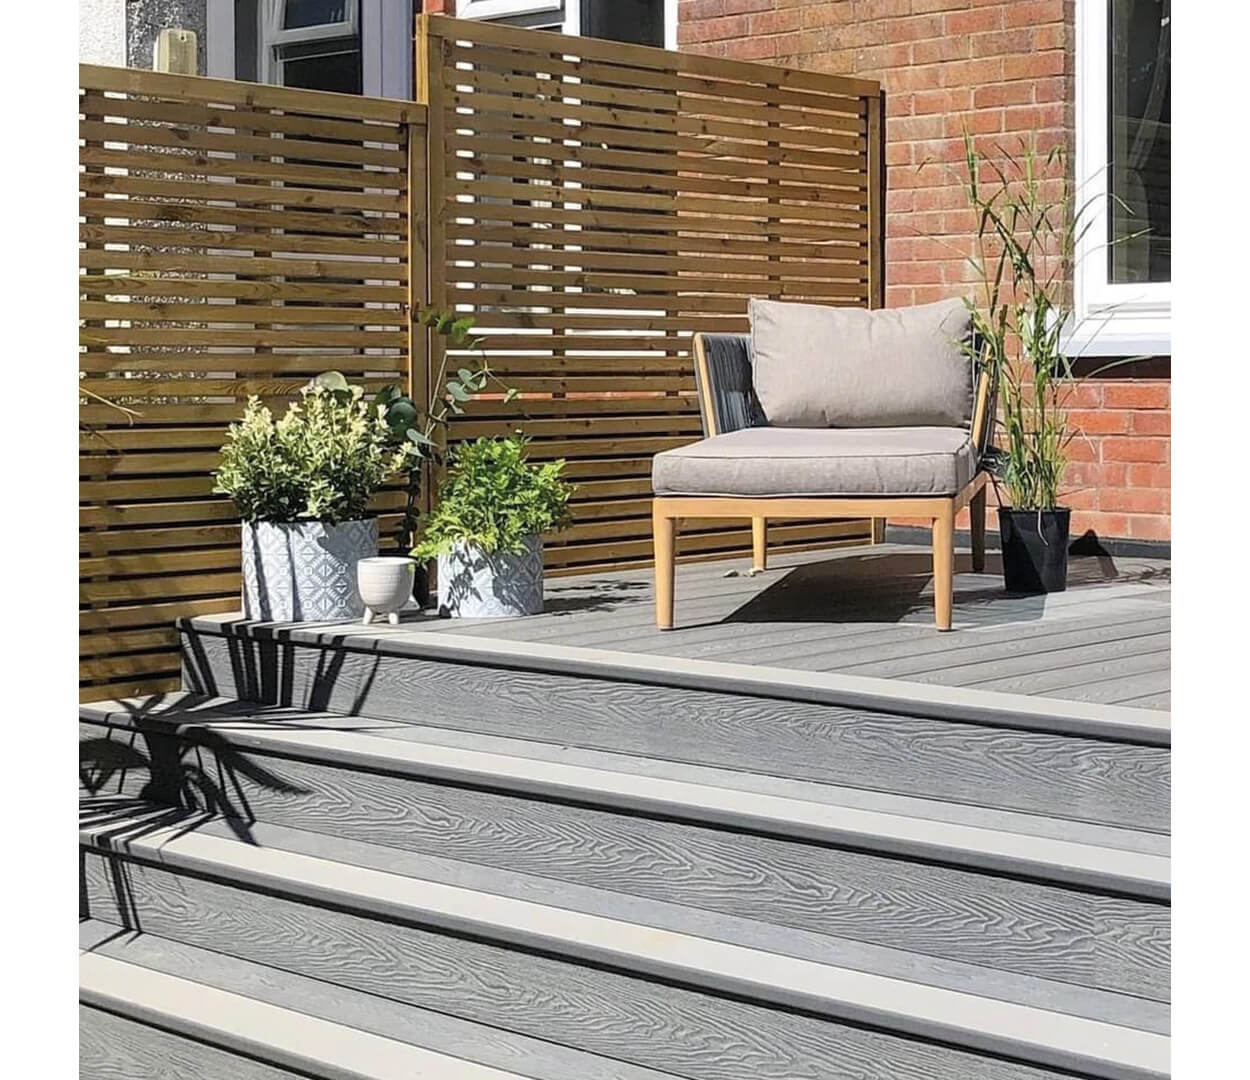 Composite Decking boards with bullnose edging, for a curved finish - installed by Gull Rock